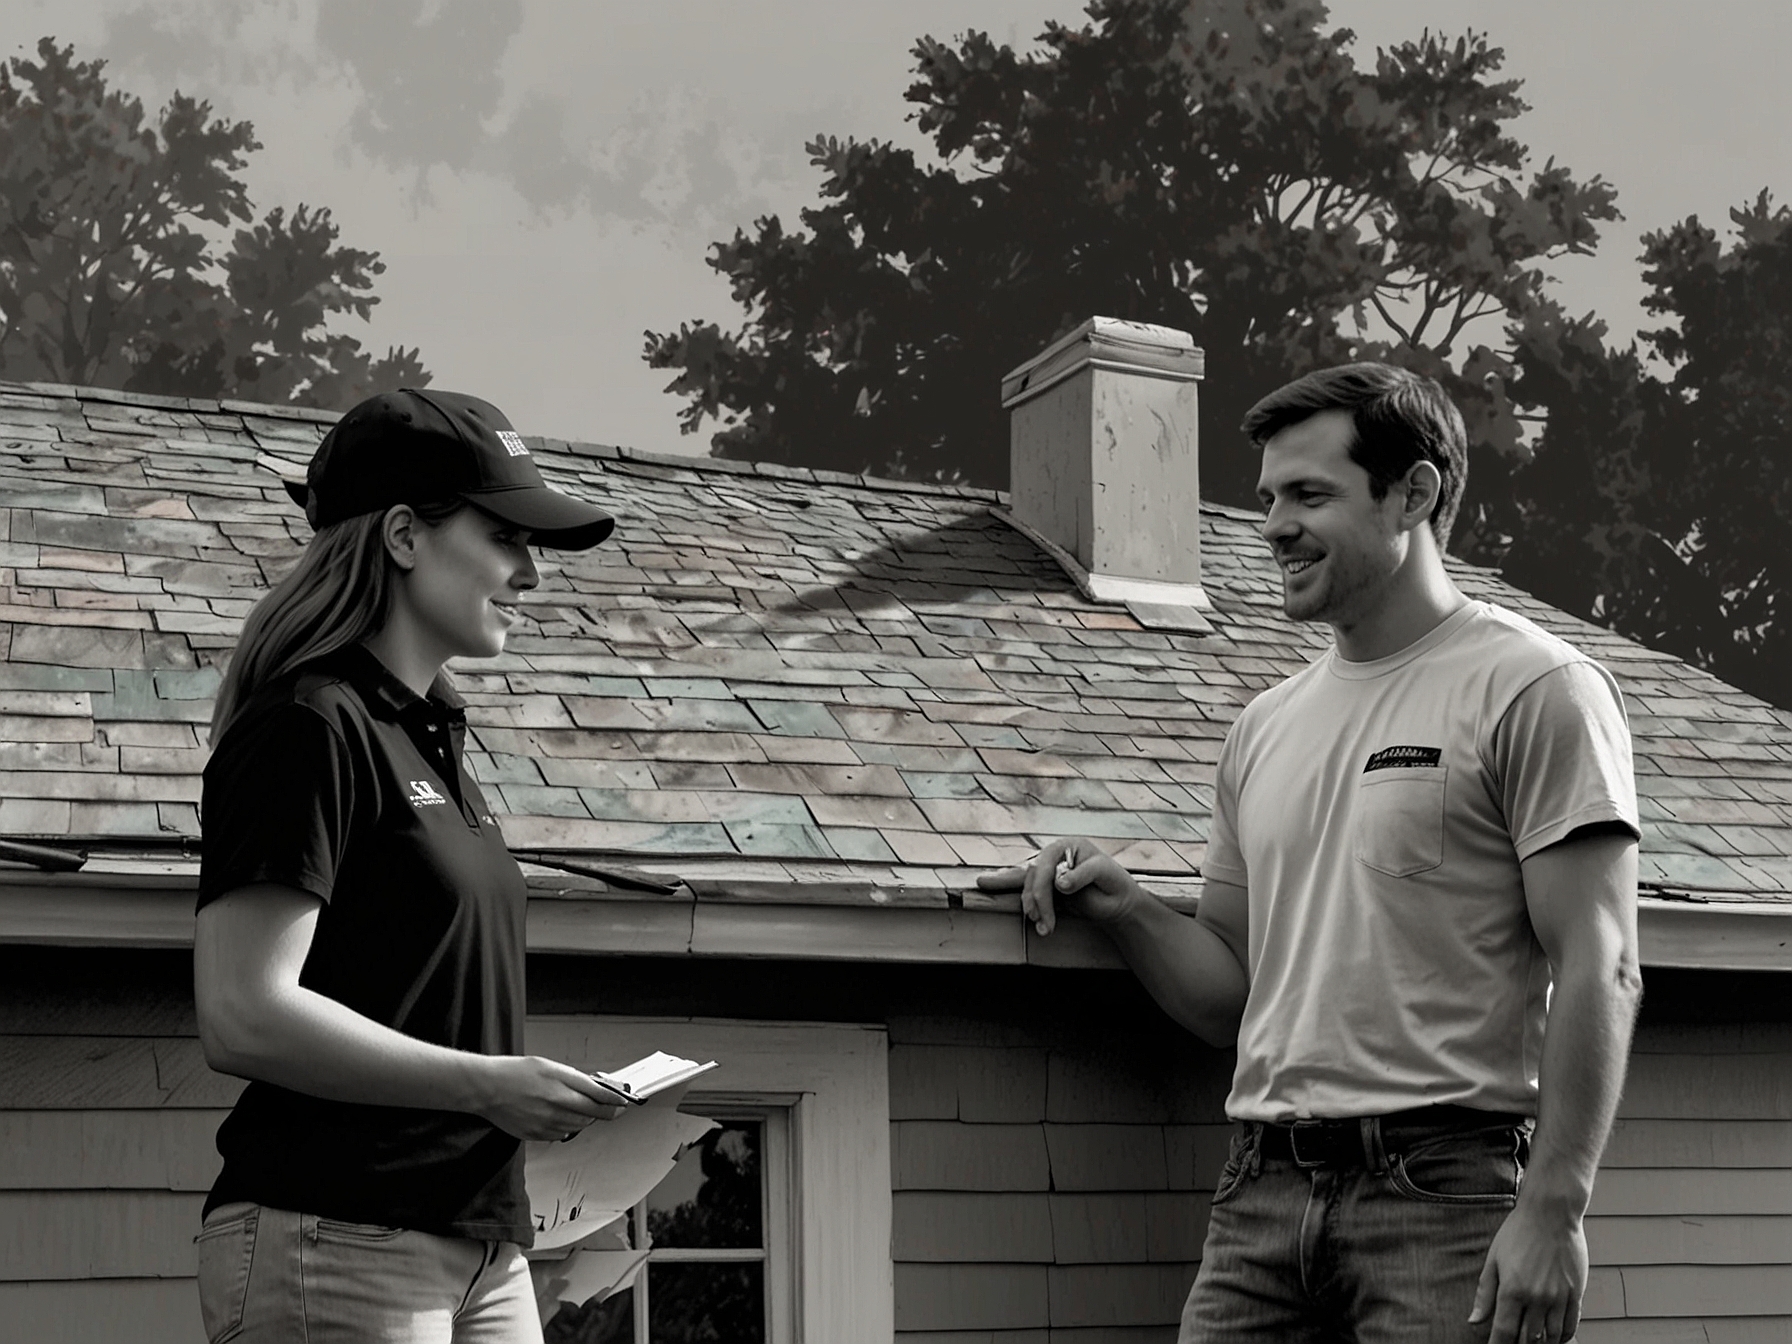 Amanda Rubner consults with Joe O'Brien from Four Leaf Roofing and Windows, showcasing the initial thorough roof inspection that set them apart from competitors.